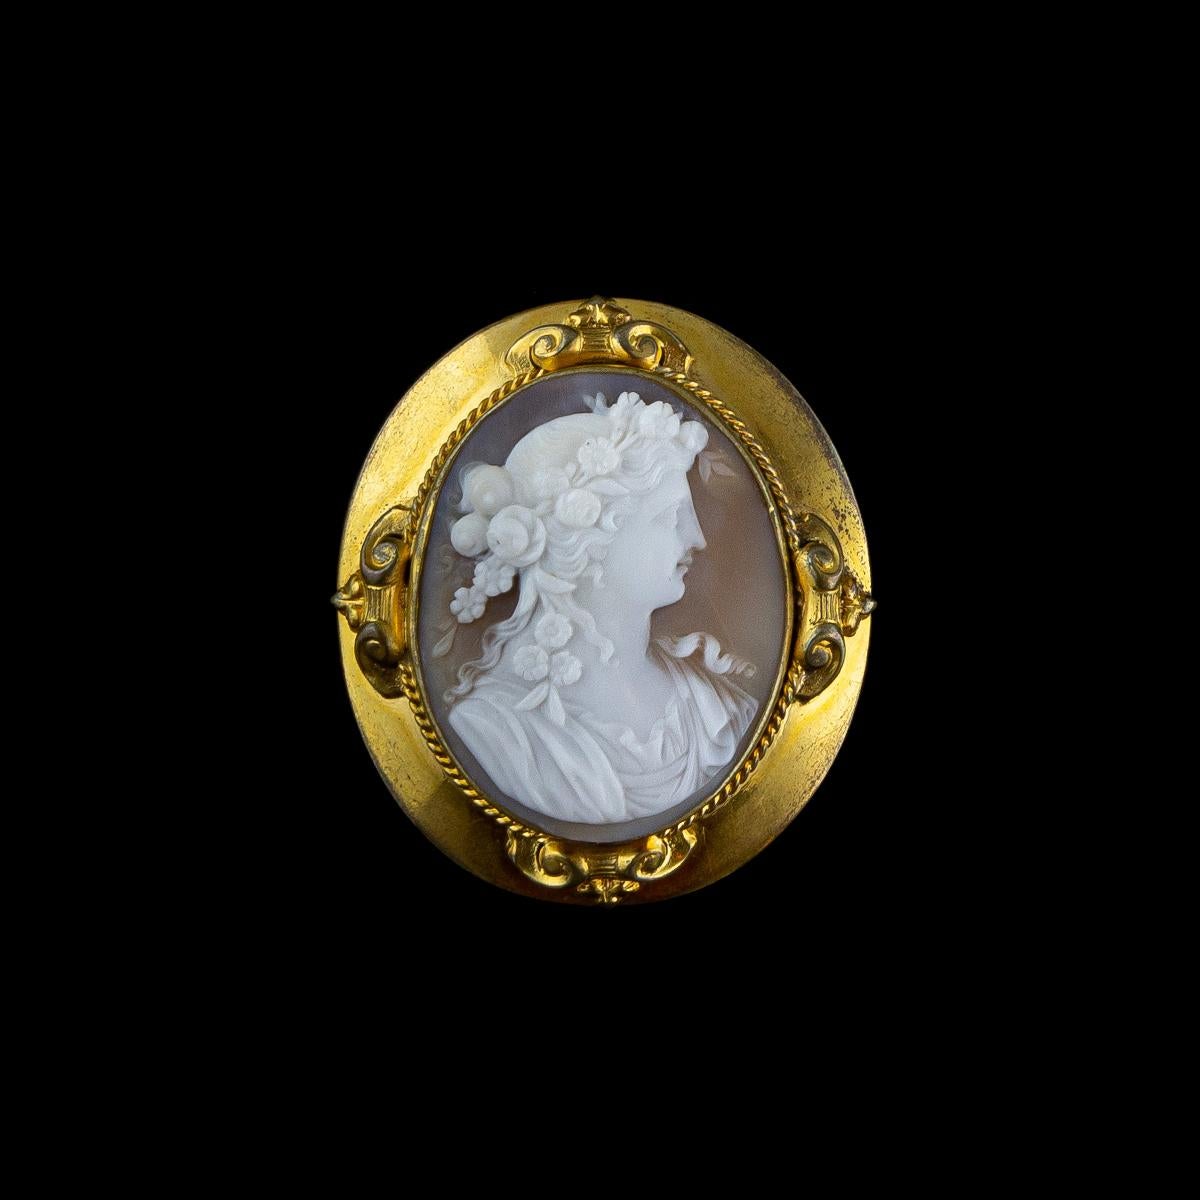 1870s antique brooch in gold-finish metal with a shell cameo depicting a female profile with a delightful hairstyle with flowers. Cameo set in a carved and engraved setting.
An ancient jewel is much more than its intrinsic value, in gold, silver and